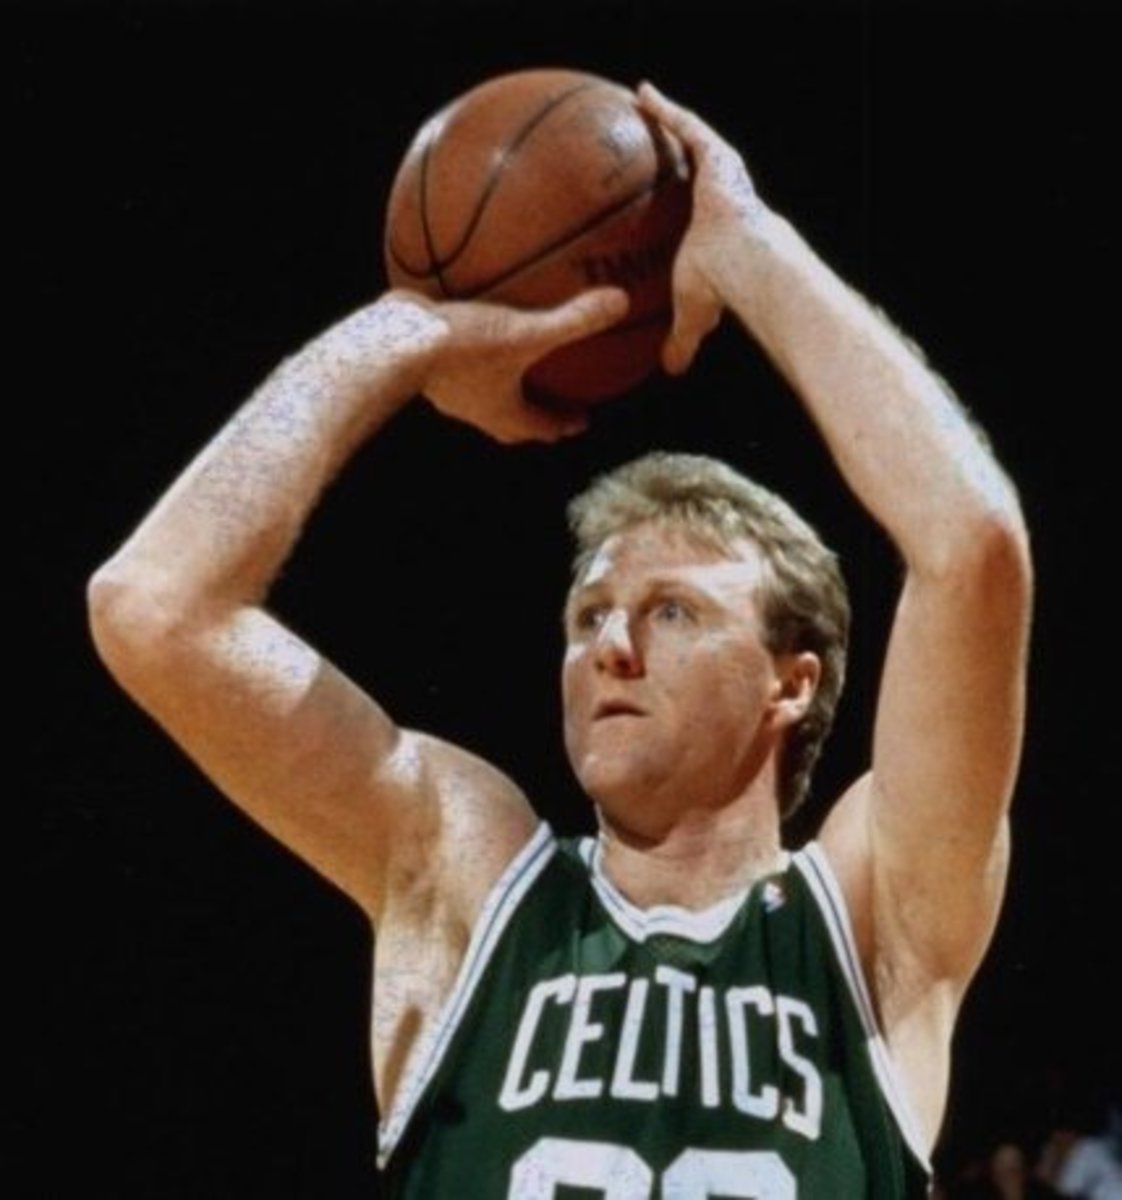 Larry Bird is synonymous with the Boston Celtics. His rivalry with Magic Johnson and the Lakers is considered to be one the greatest in sports.